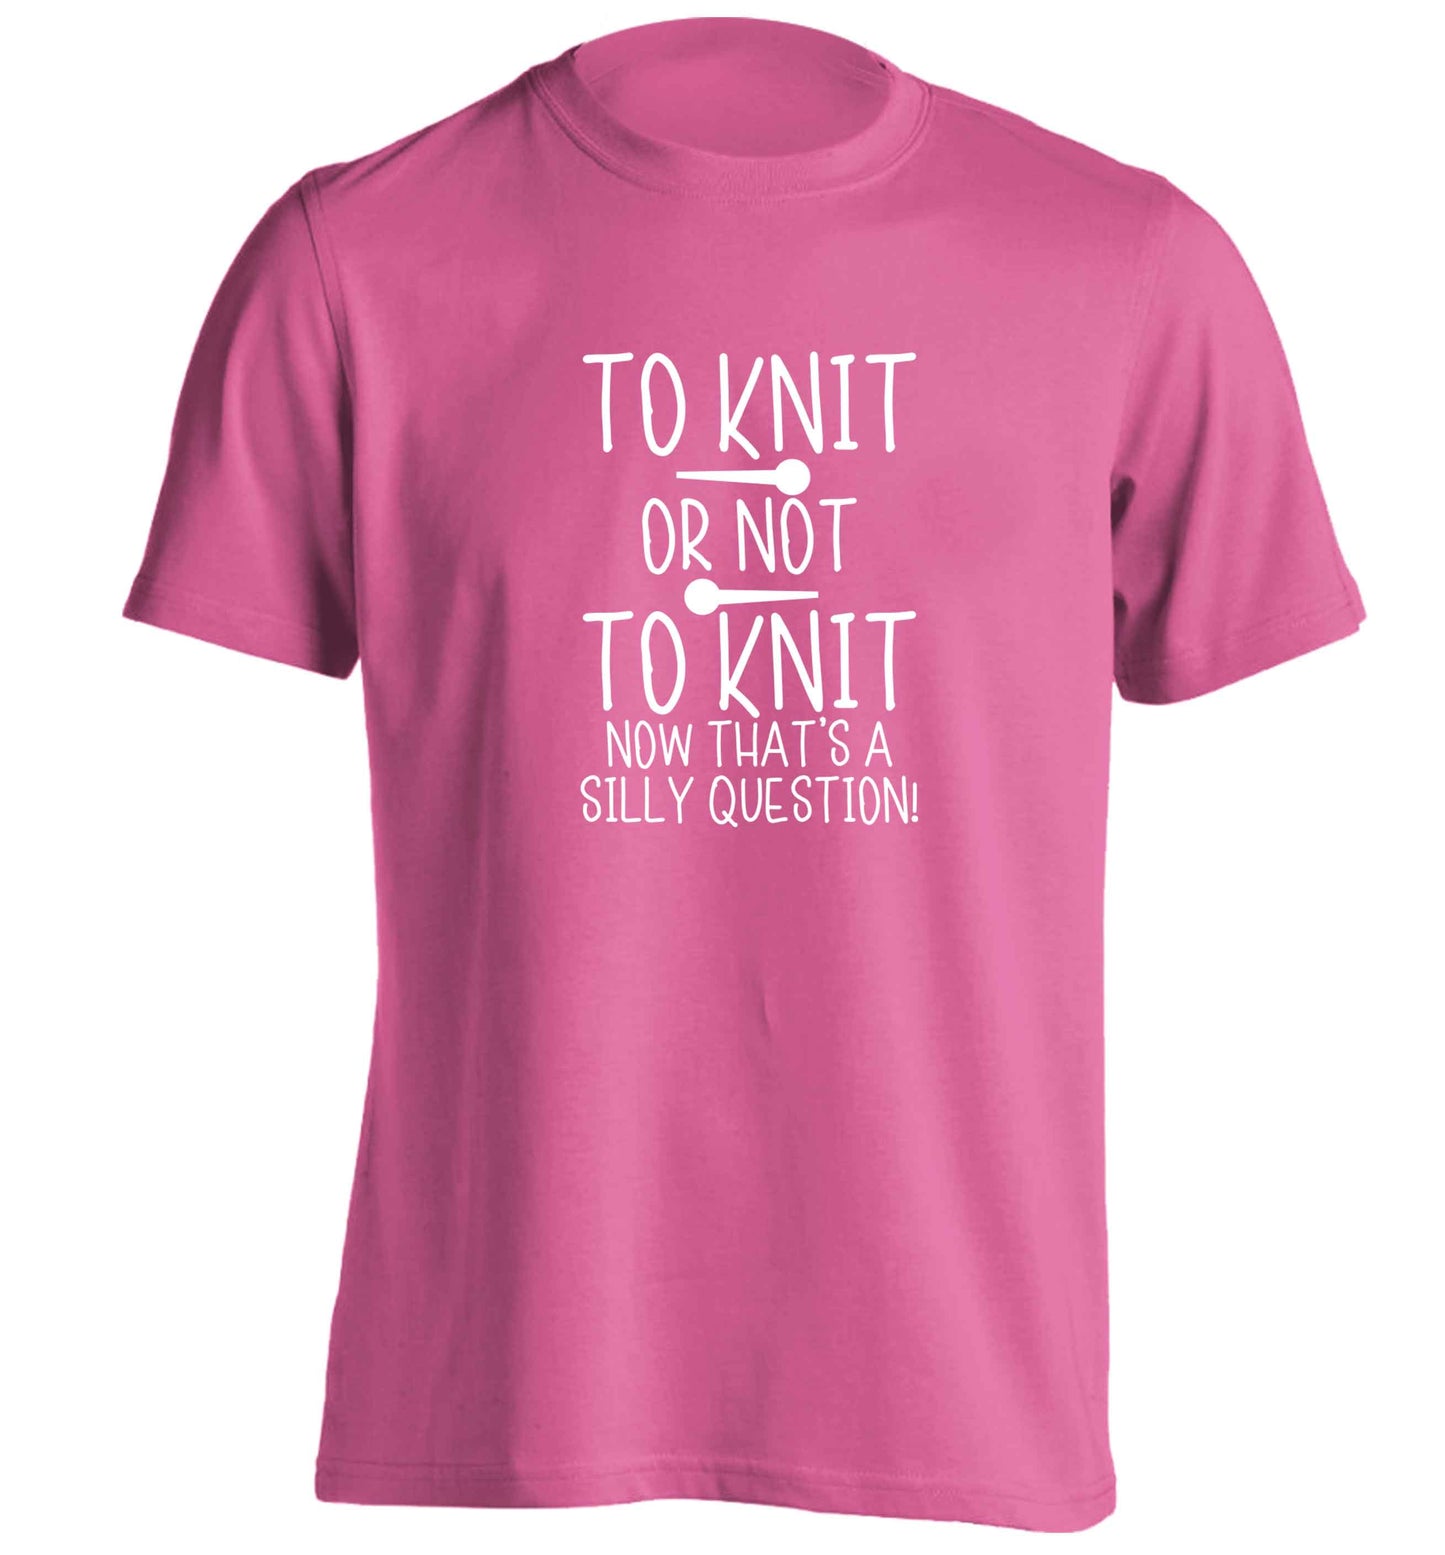 To knit or not to knit now that's a silly question adults unisex pink Tshirt 2XL